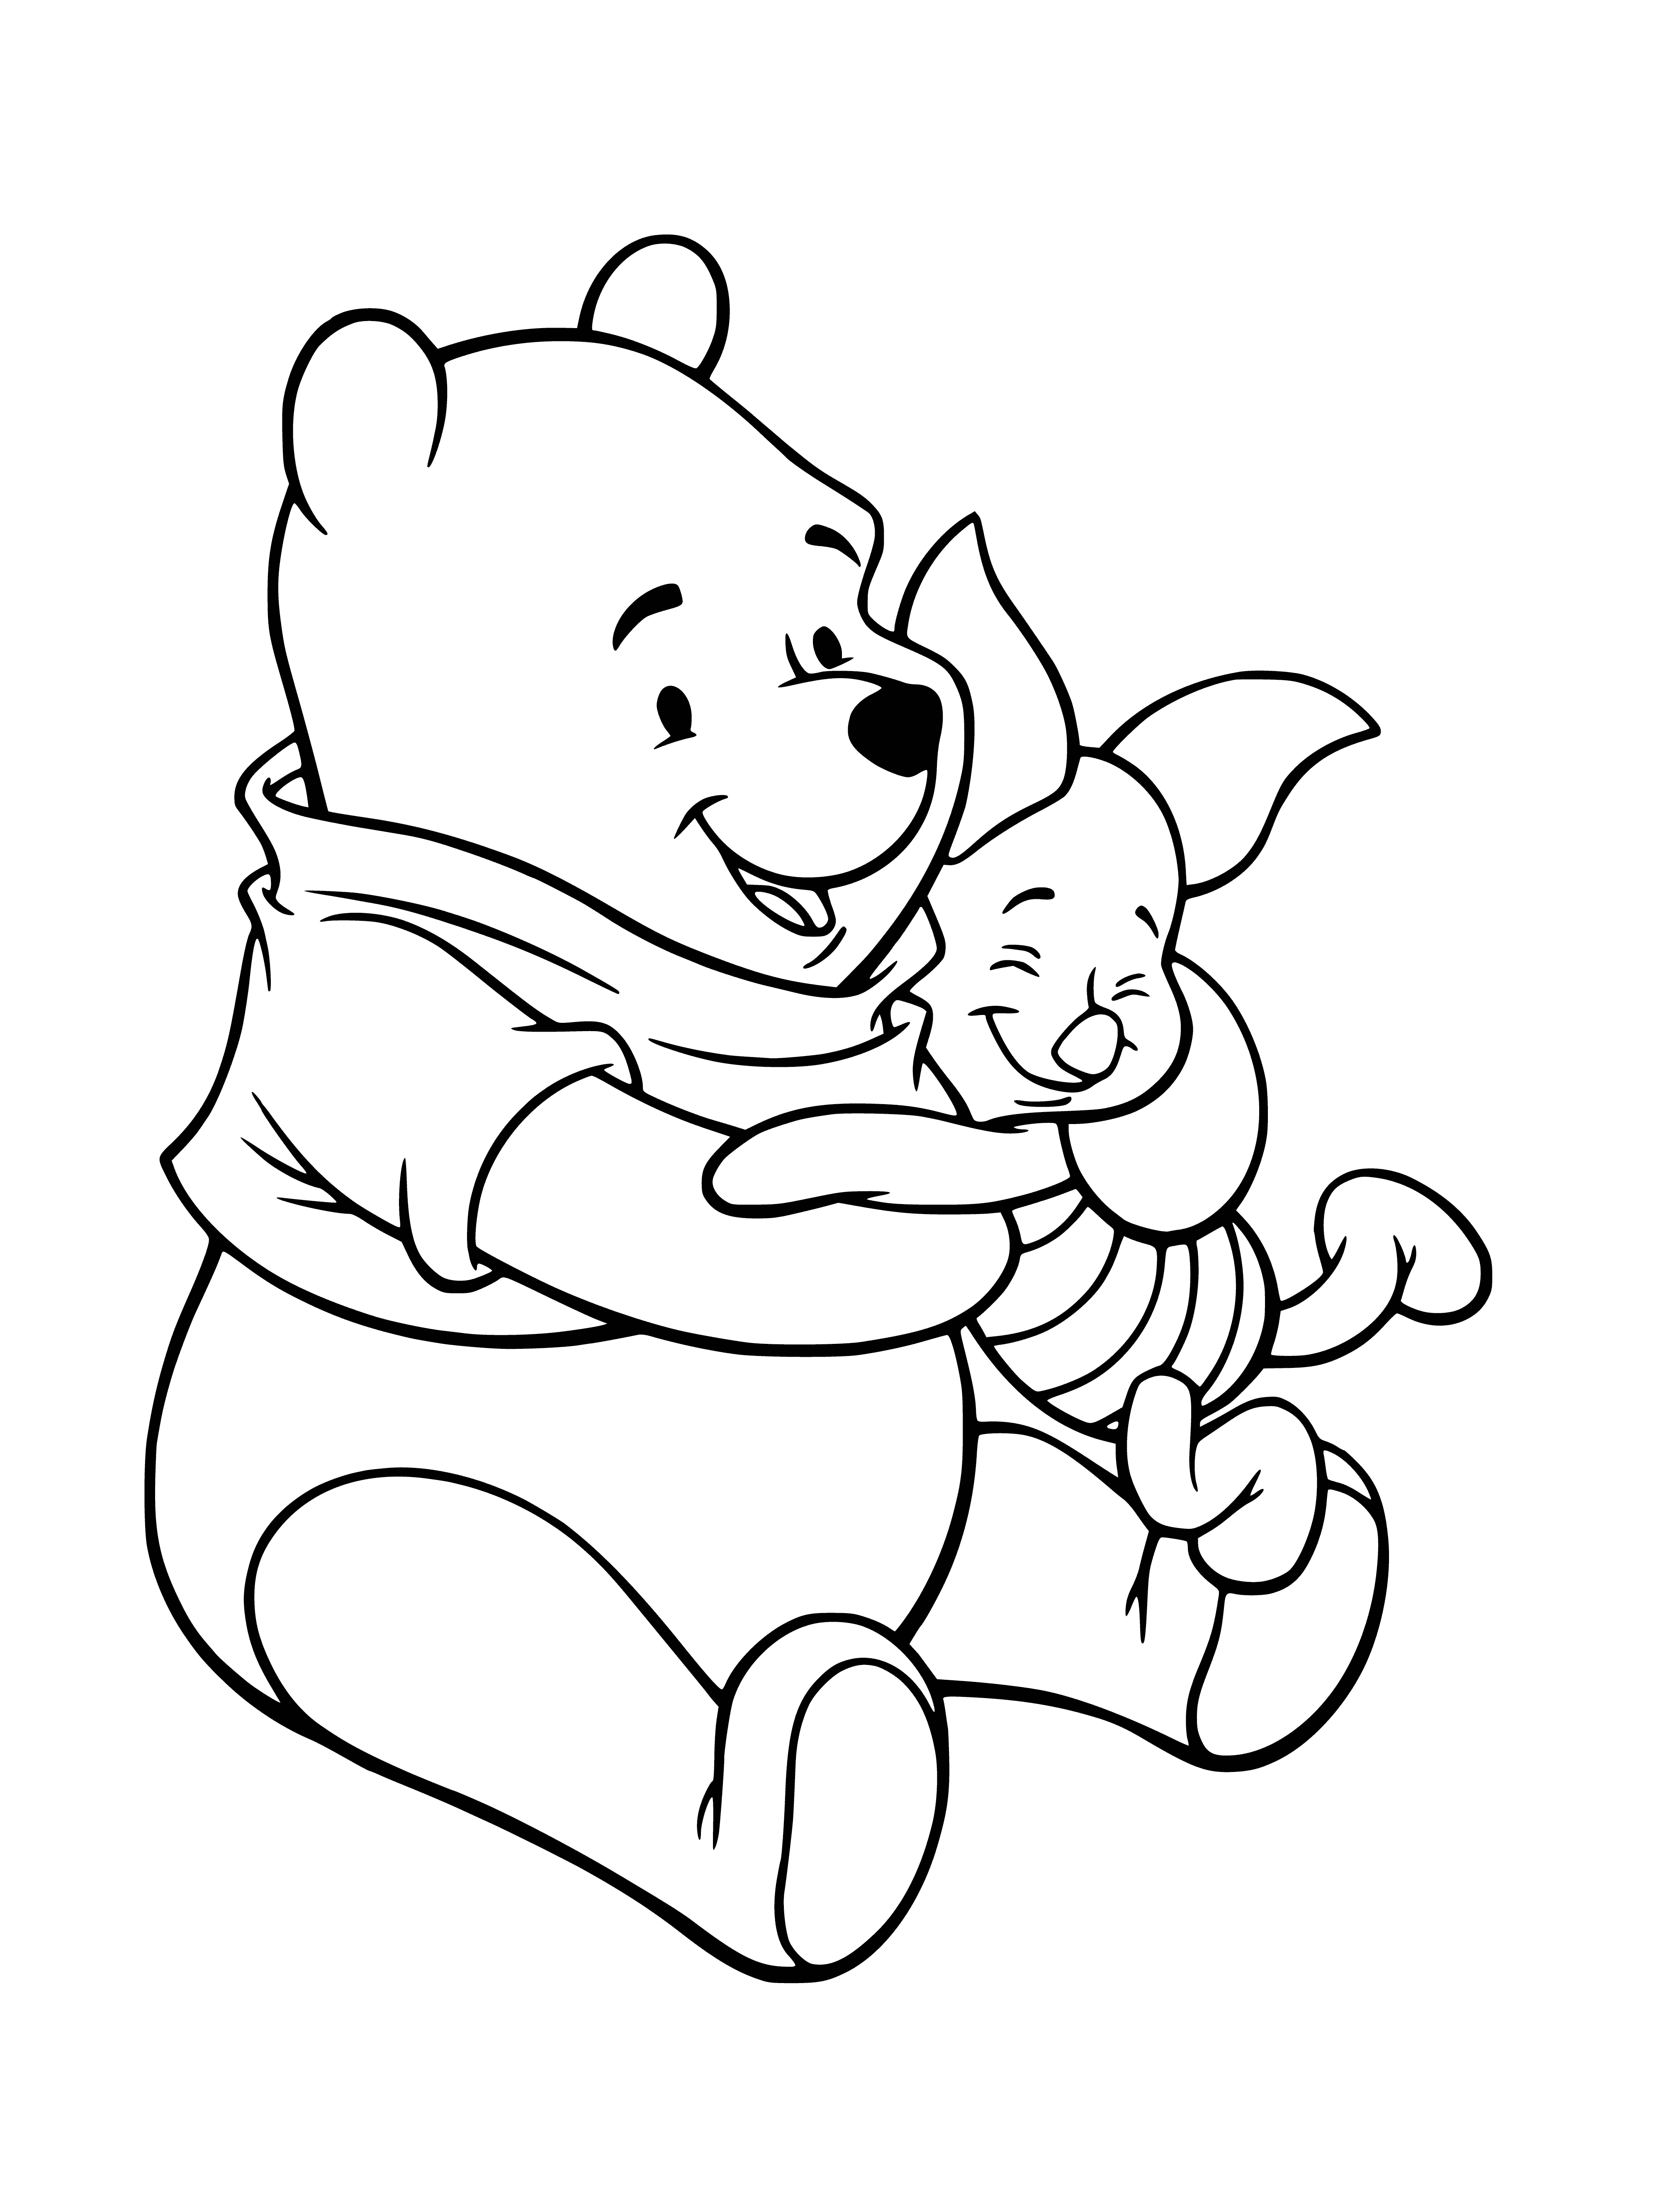 Piglet and Vinnie coloring page